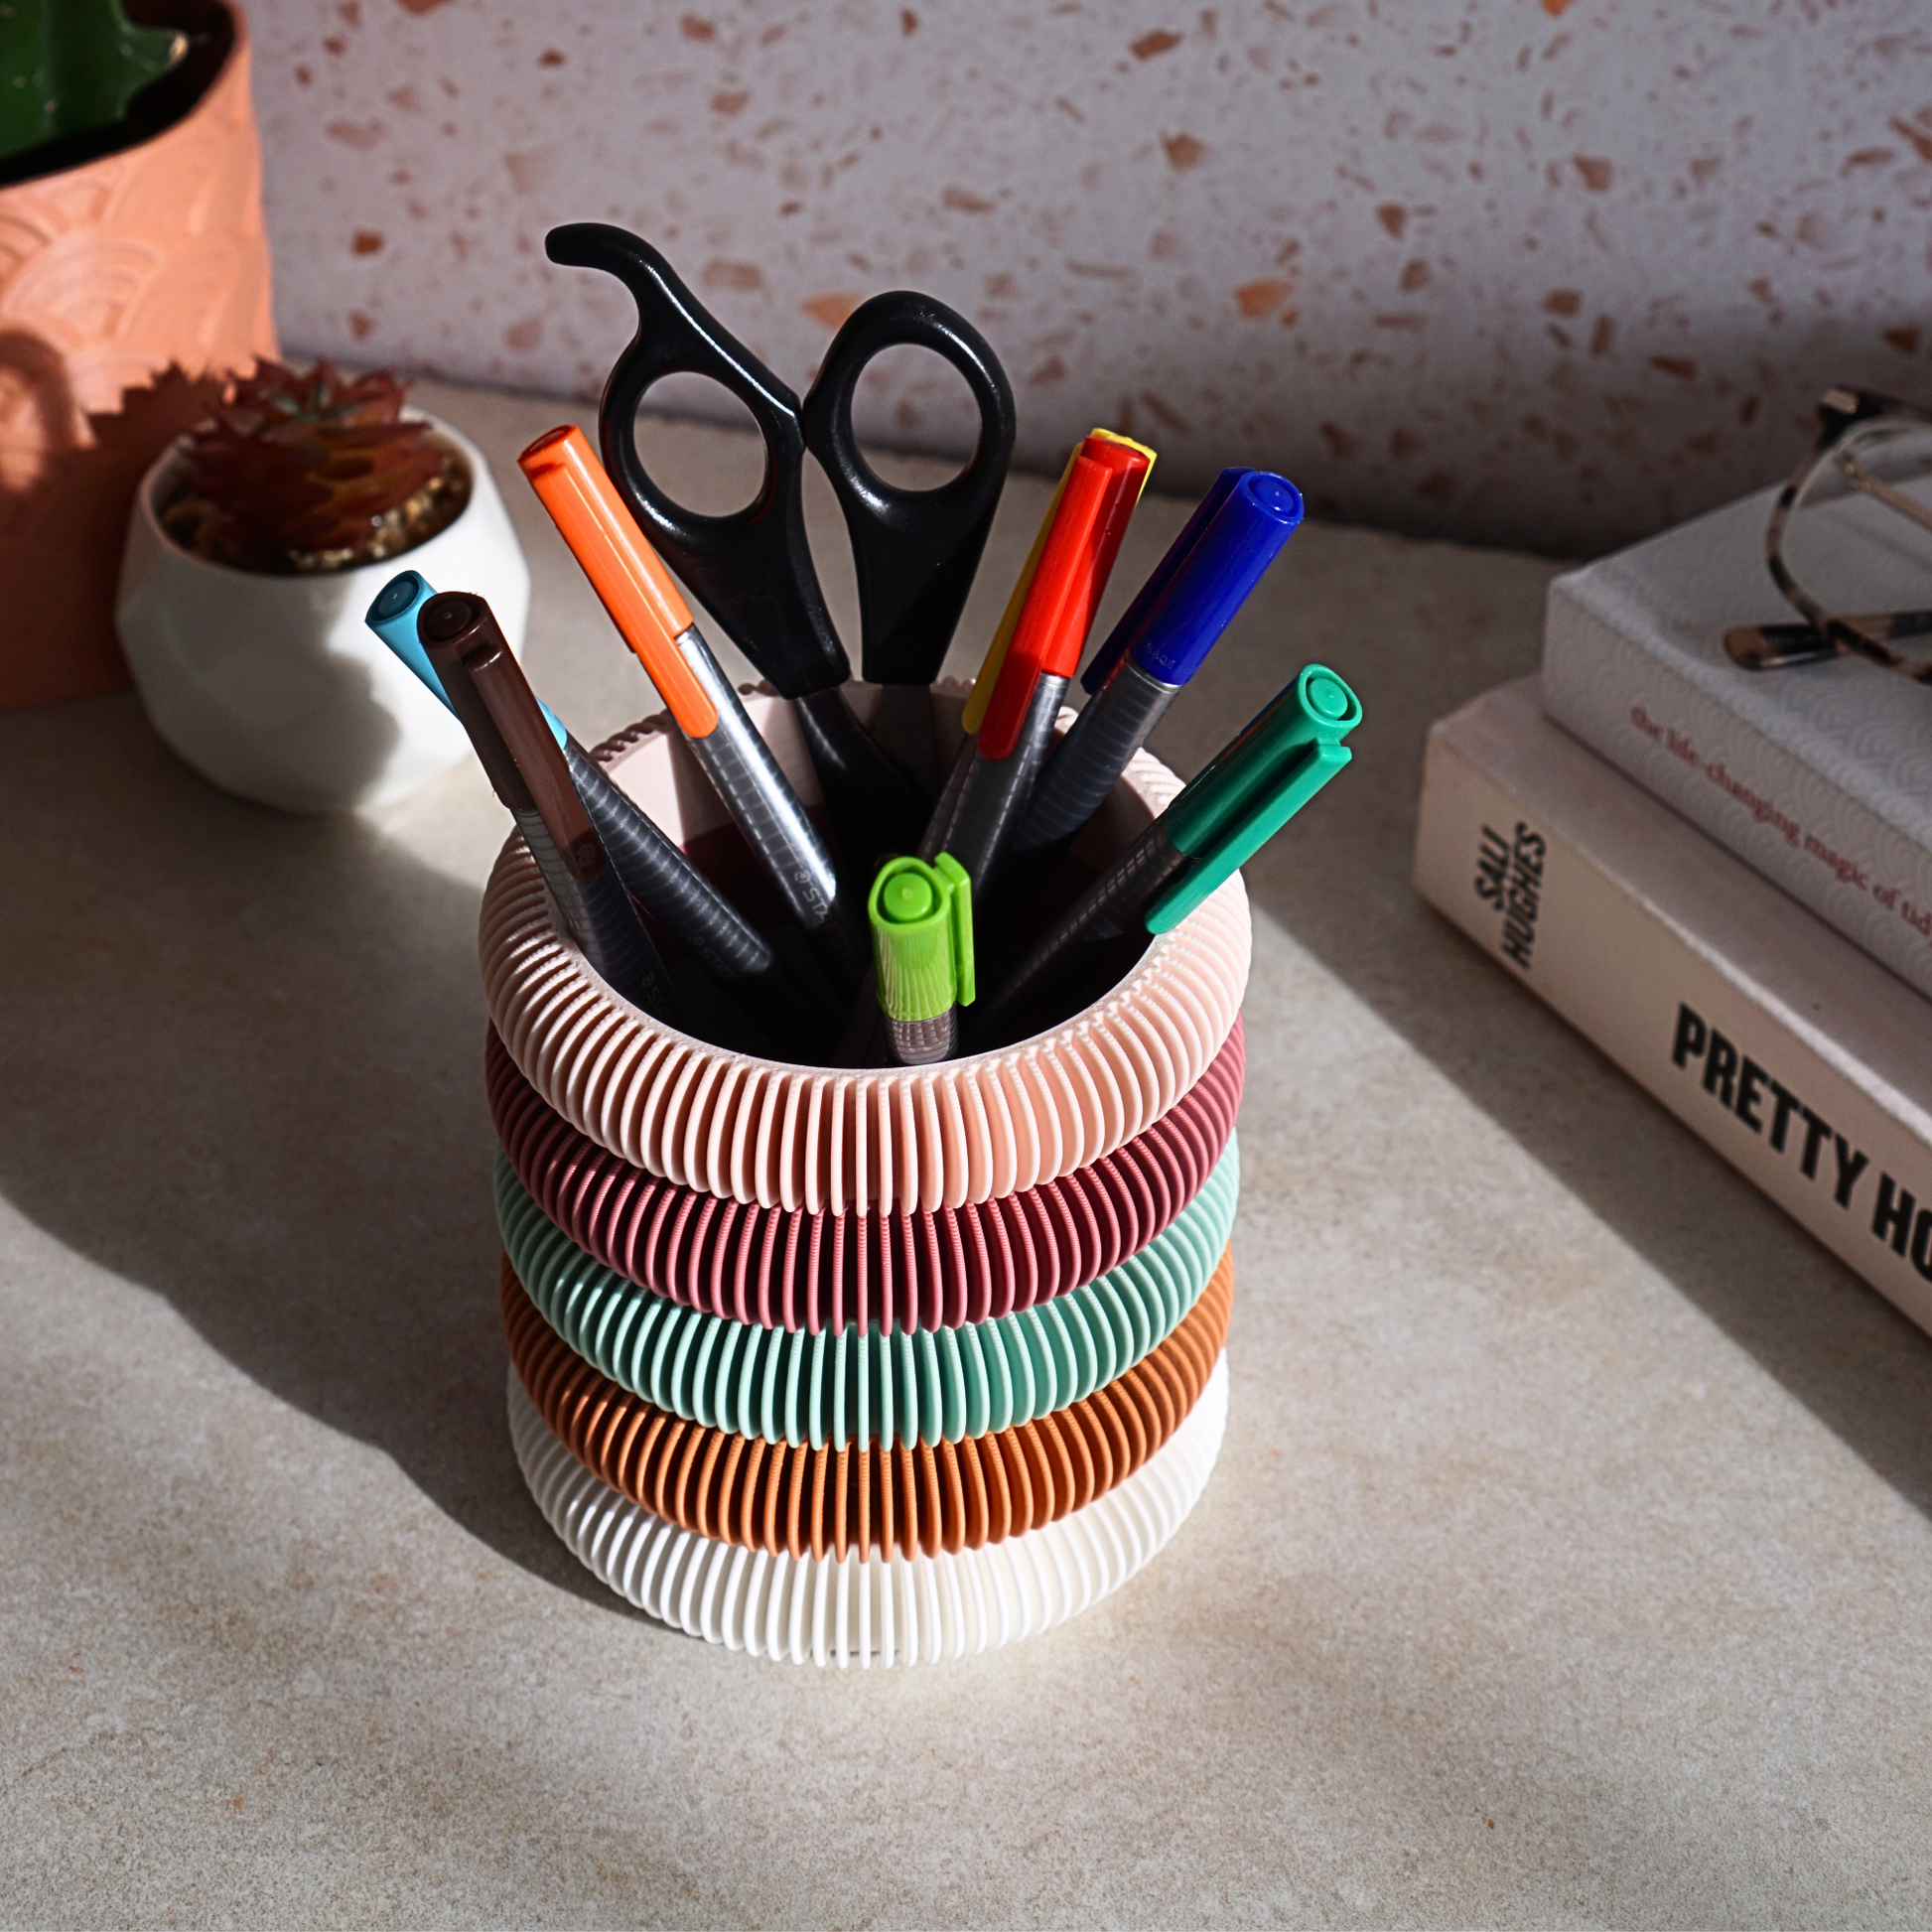 Bright coloured funky storage pot holding pens, pencils and scissors on a desk with plants and books. Home organisation and storage